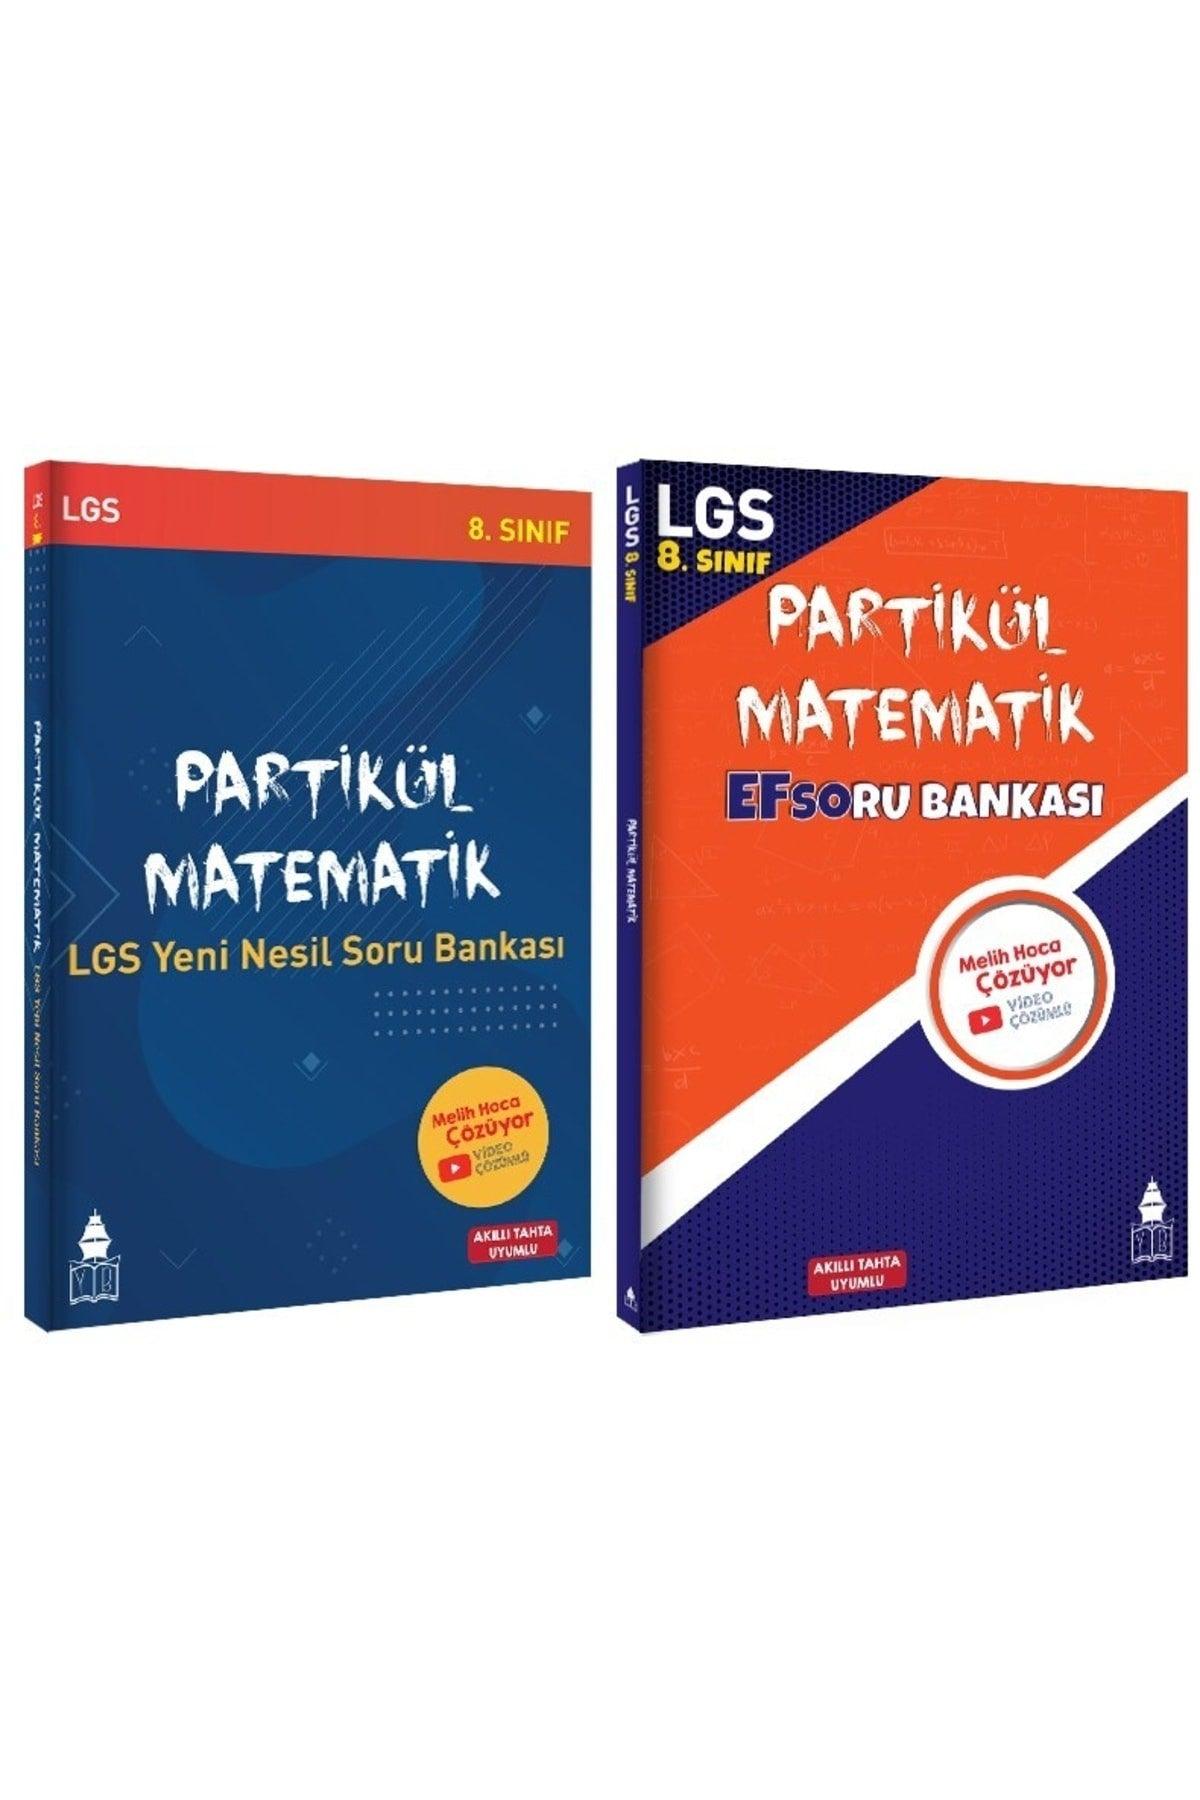 8th Grade Lgs Particle Mathematics Efso And New Generation Question Bank 2 Books - Tonguç Akademi - Swordslife